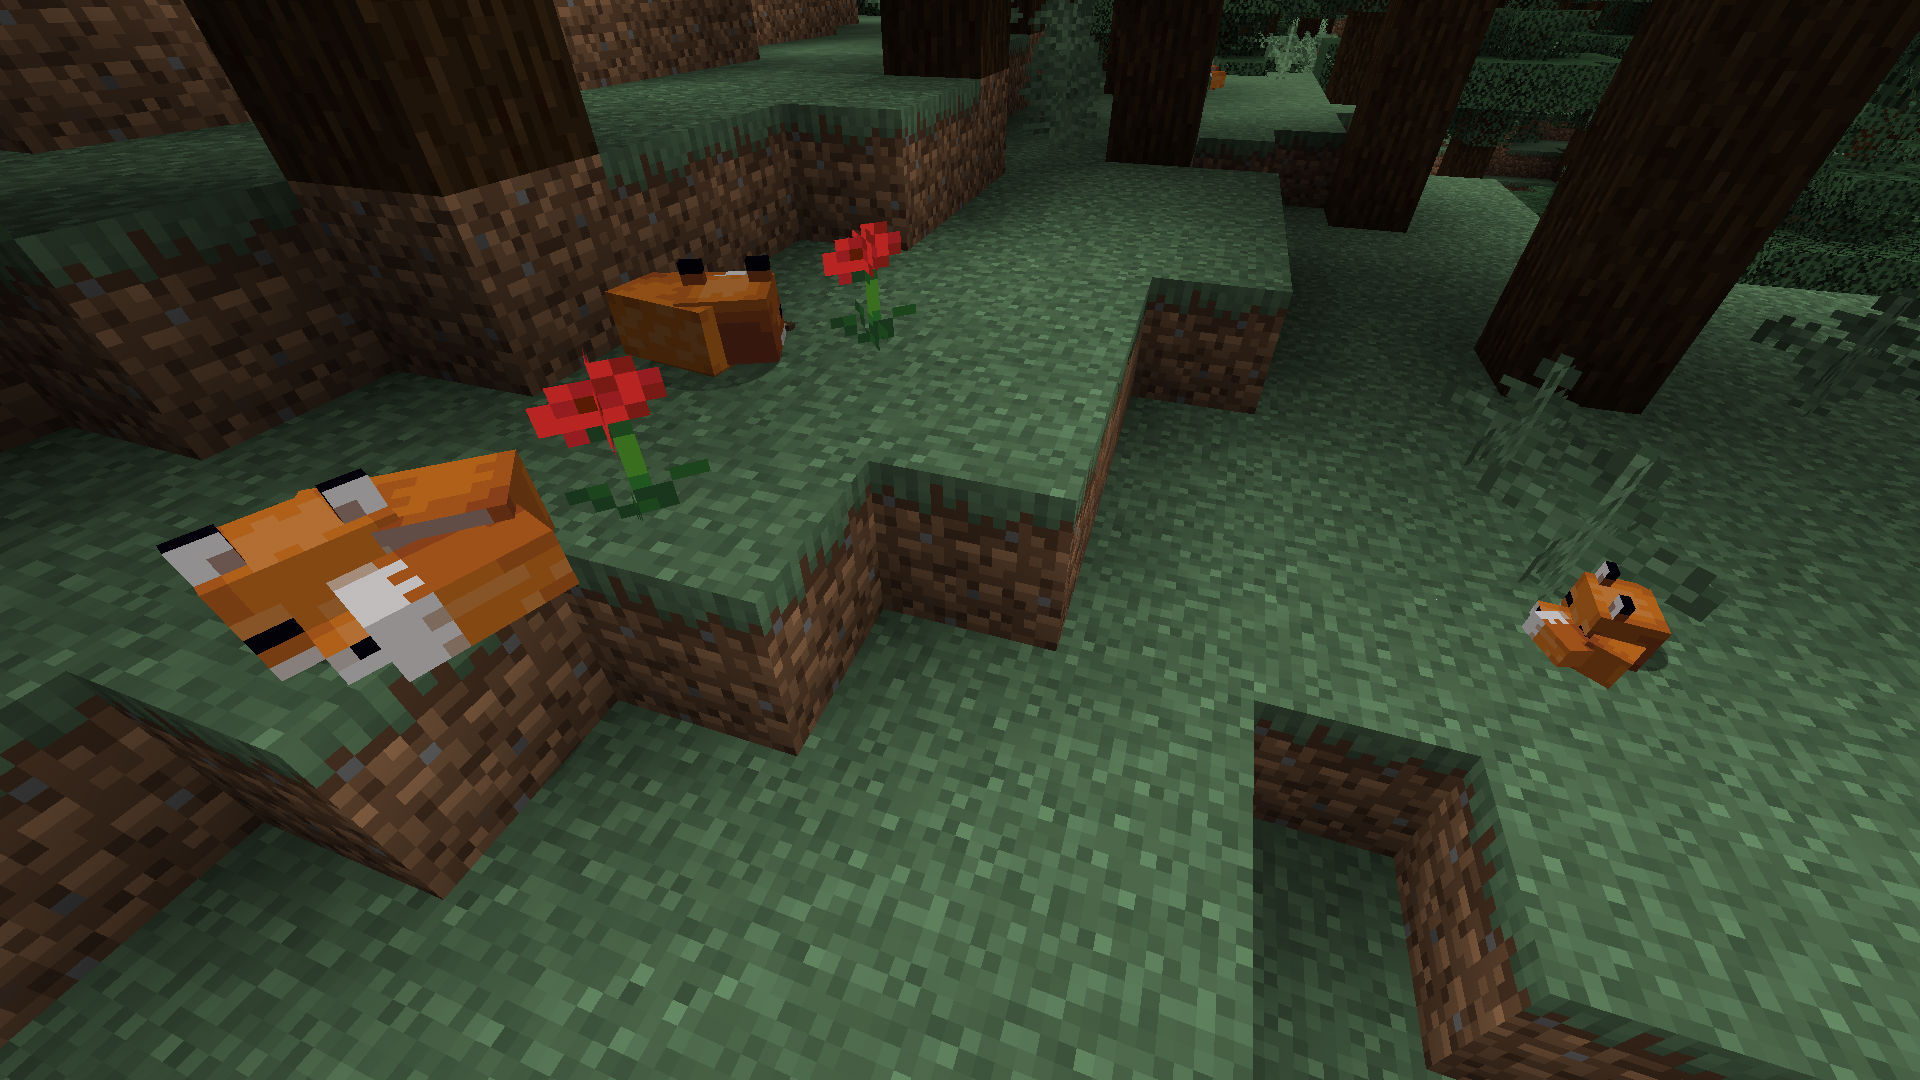 Minecraft fox guide: How to tame a fox in Minecraft | PC Gamer